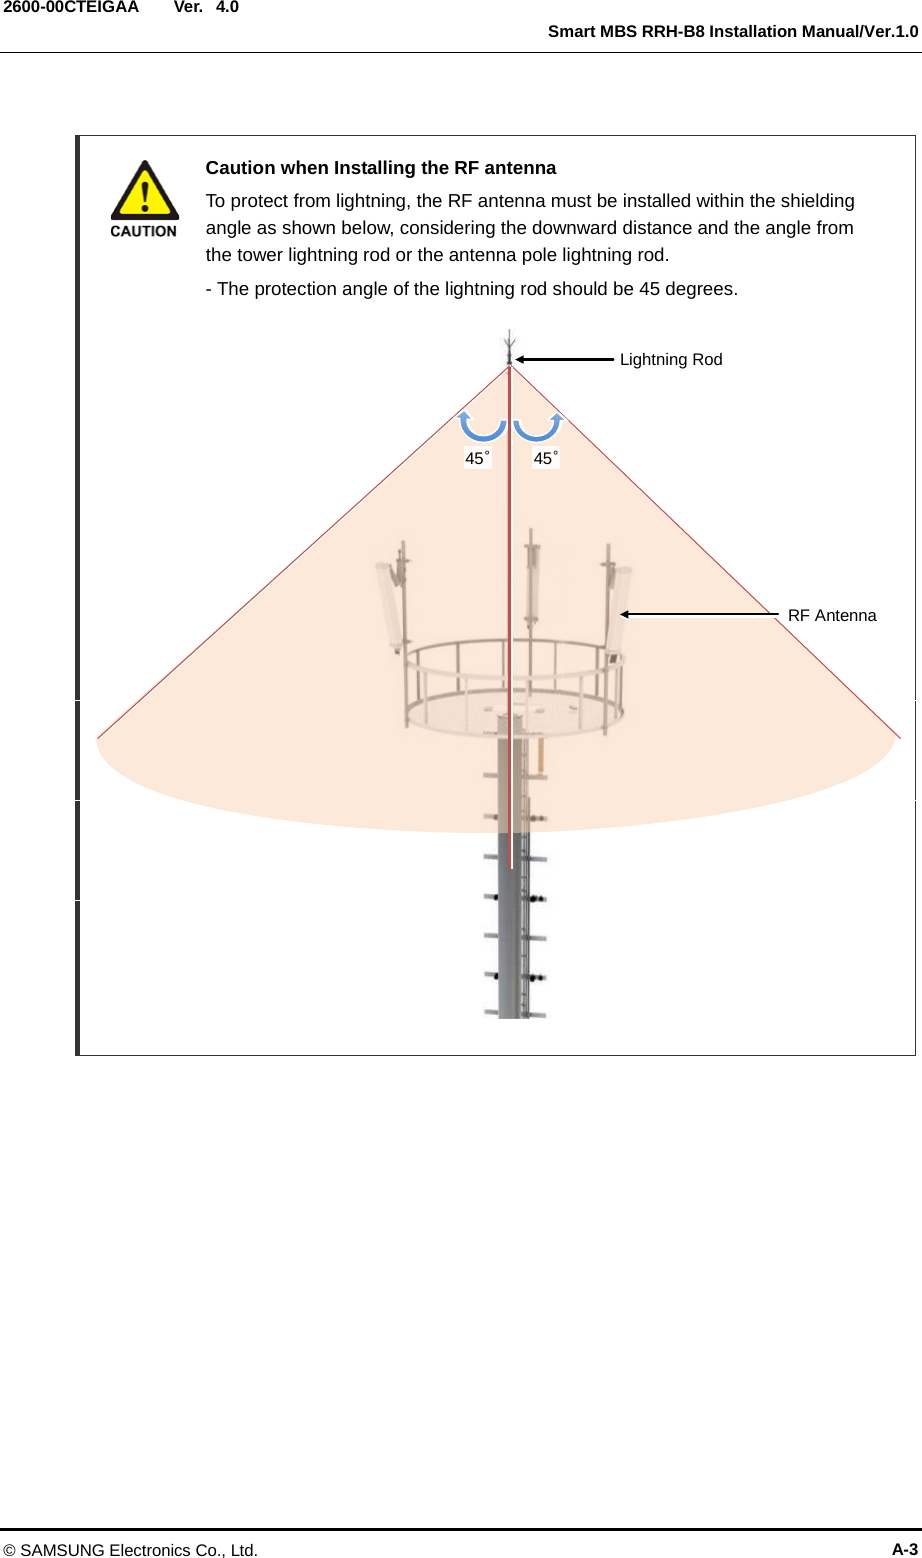  Ver.   Smart MBS RRH-B8 Installation Manual/Ver.1.0 2600-00CTEIGAA 4.0   Caution when Installing the RF antenna  To protect from lightning, the RF antenna must be installed within the shielding angle as shown below, considering the downward distance and the angle from the tower lightning rod or the antenna pole lightning rod.     - The protection angle of the lightning rod should be 45 degrees.                         Lightning Rod 45° 45° RF Antenna © SAMSUNG Electronics Co., Ltd. A-3 